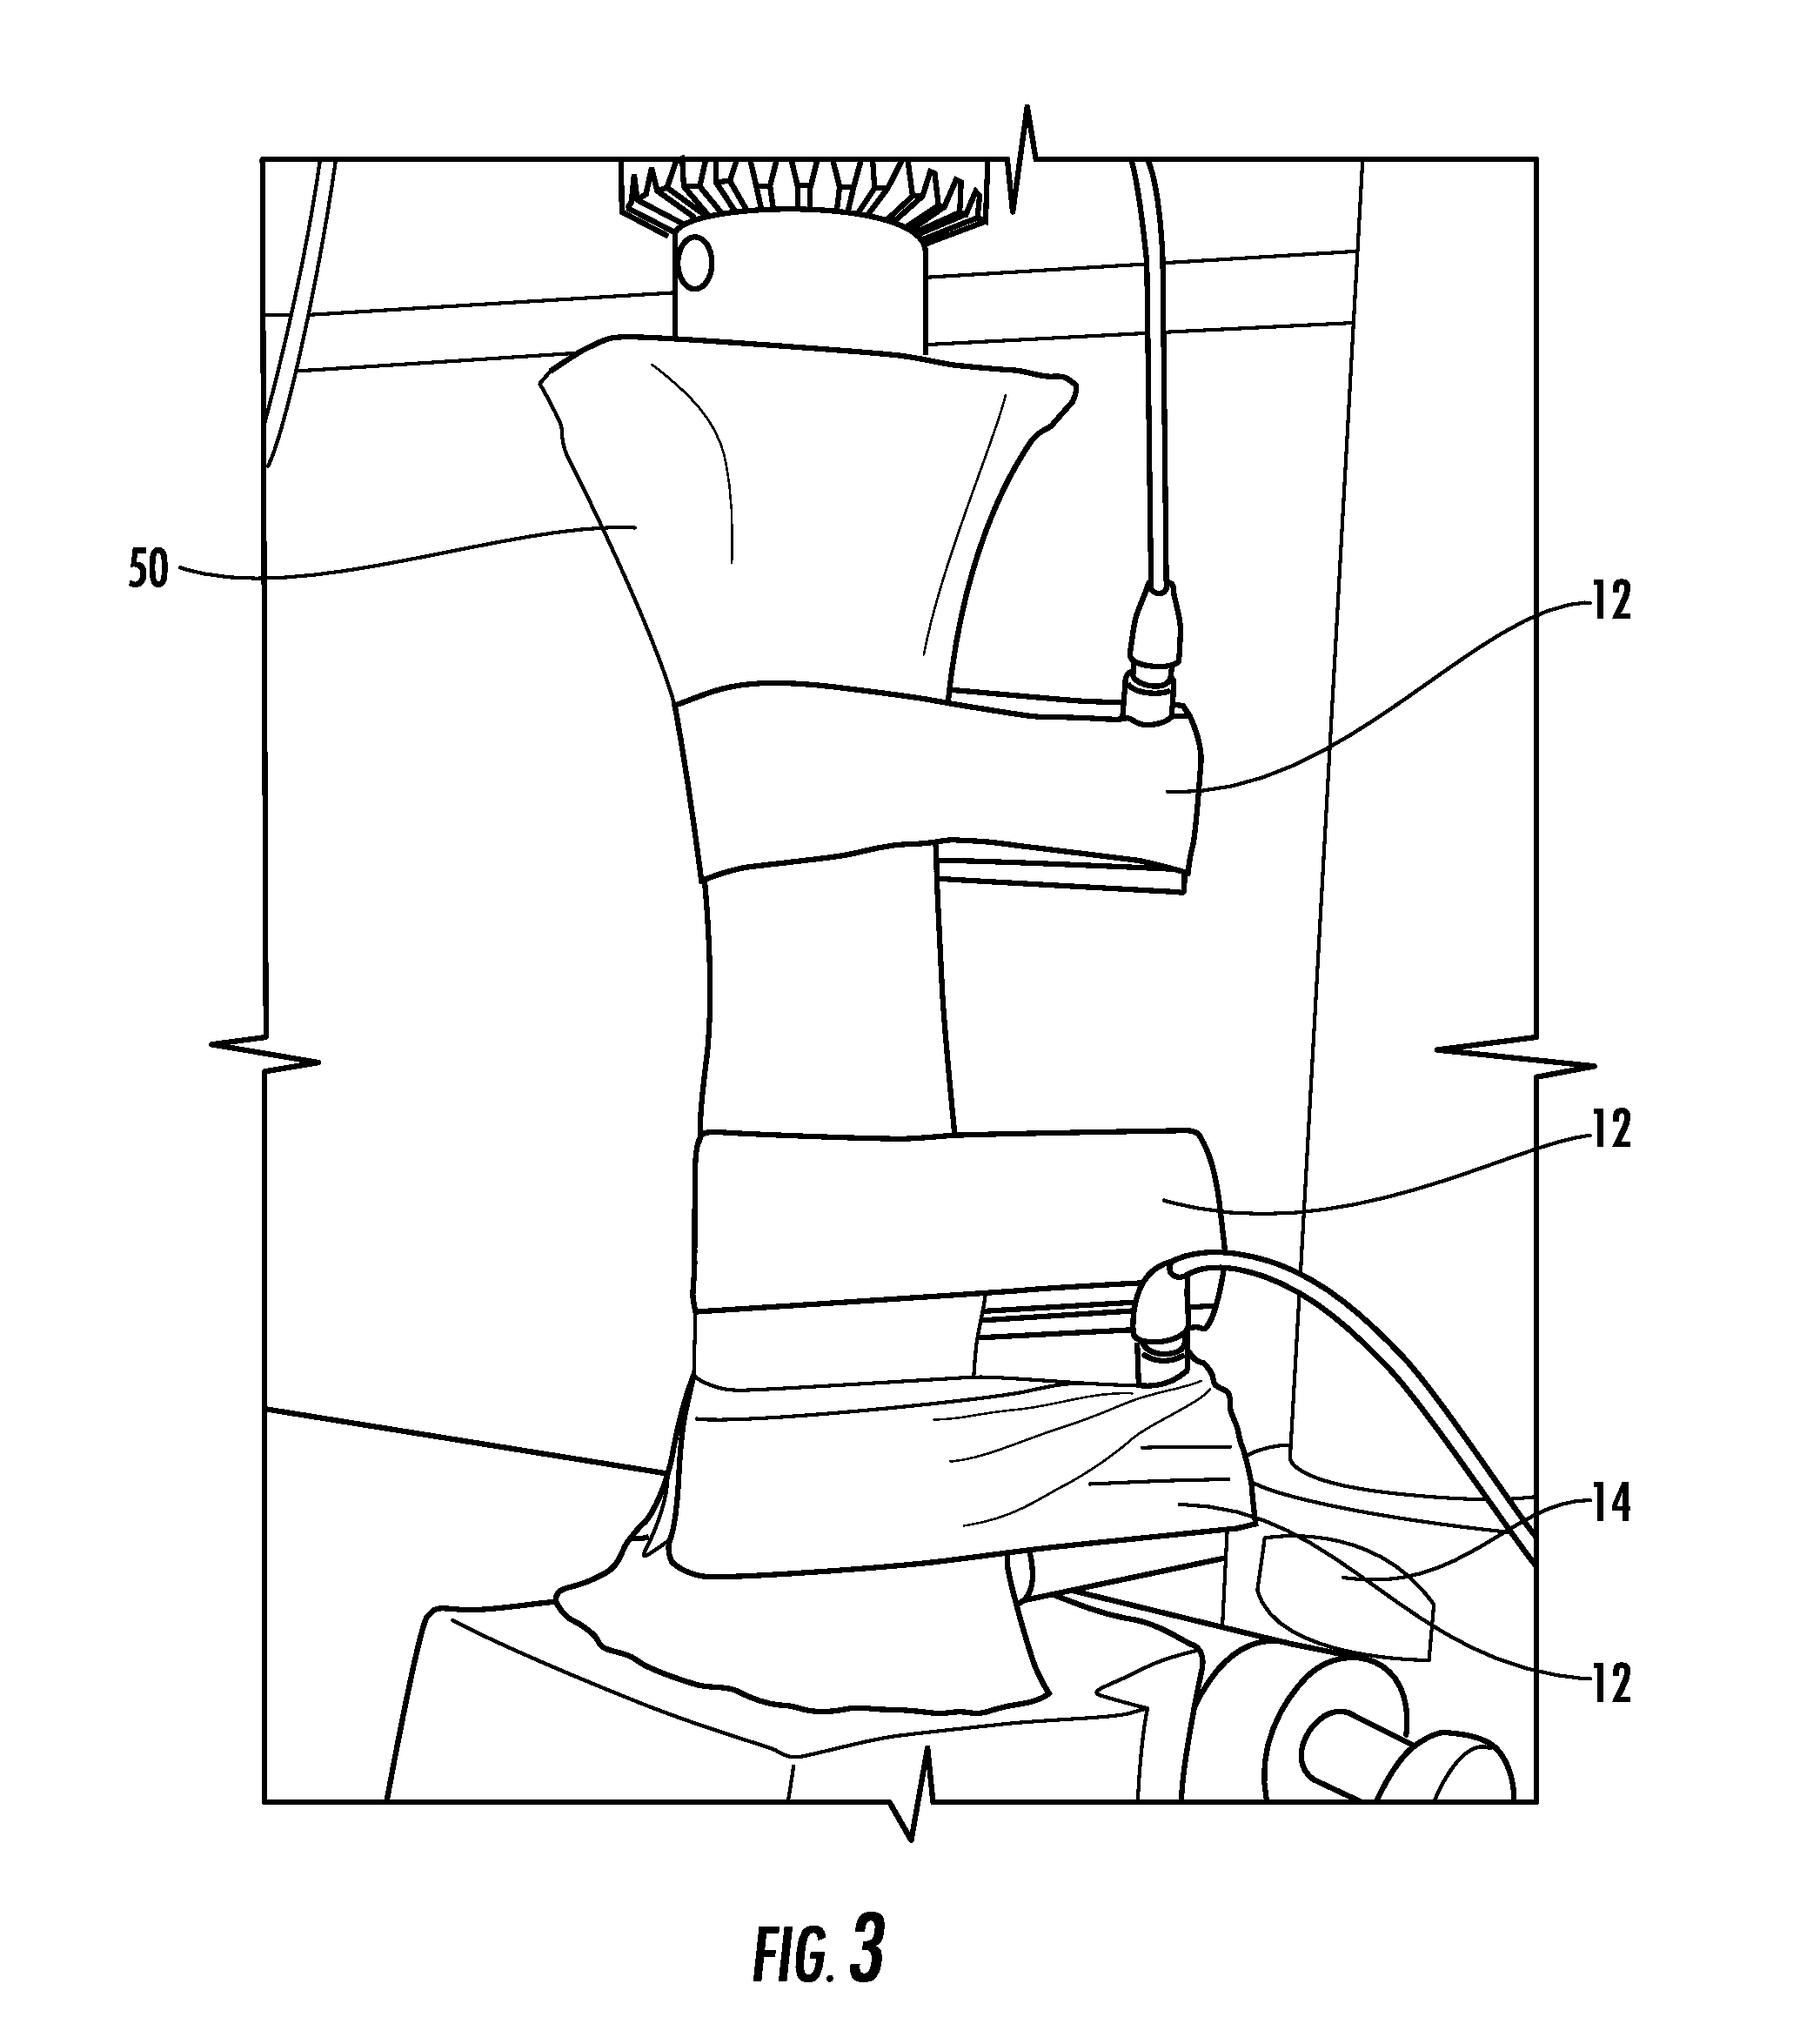 Method and system for monitoring skeletal defects